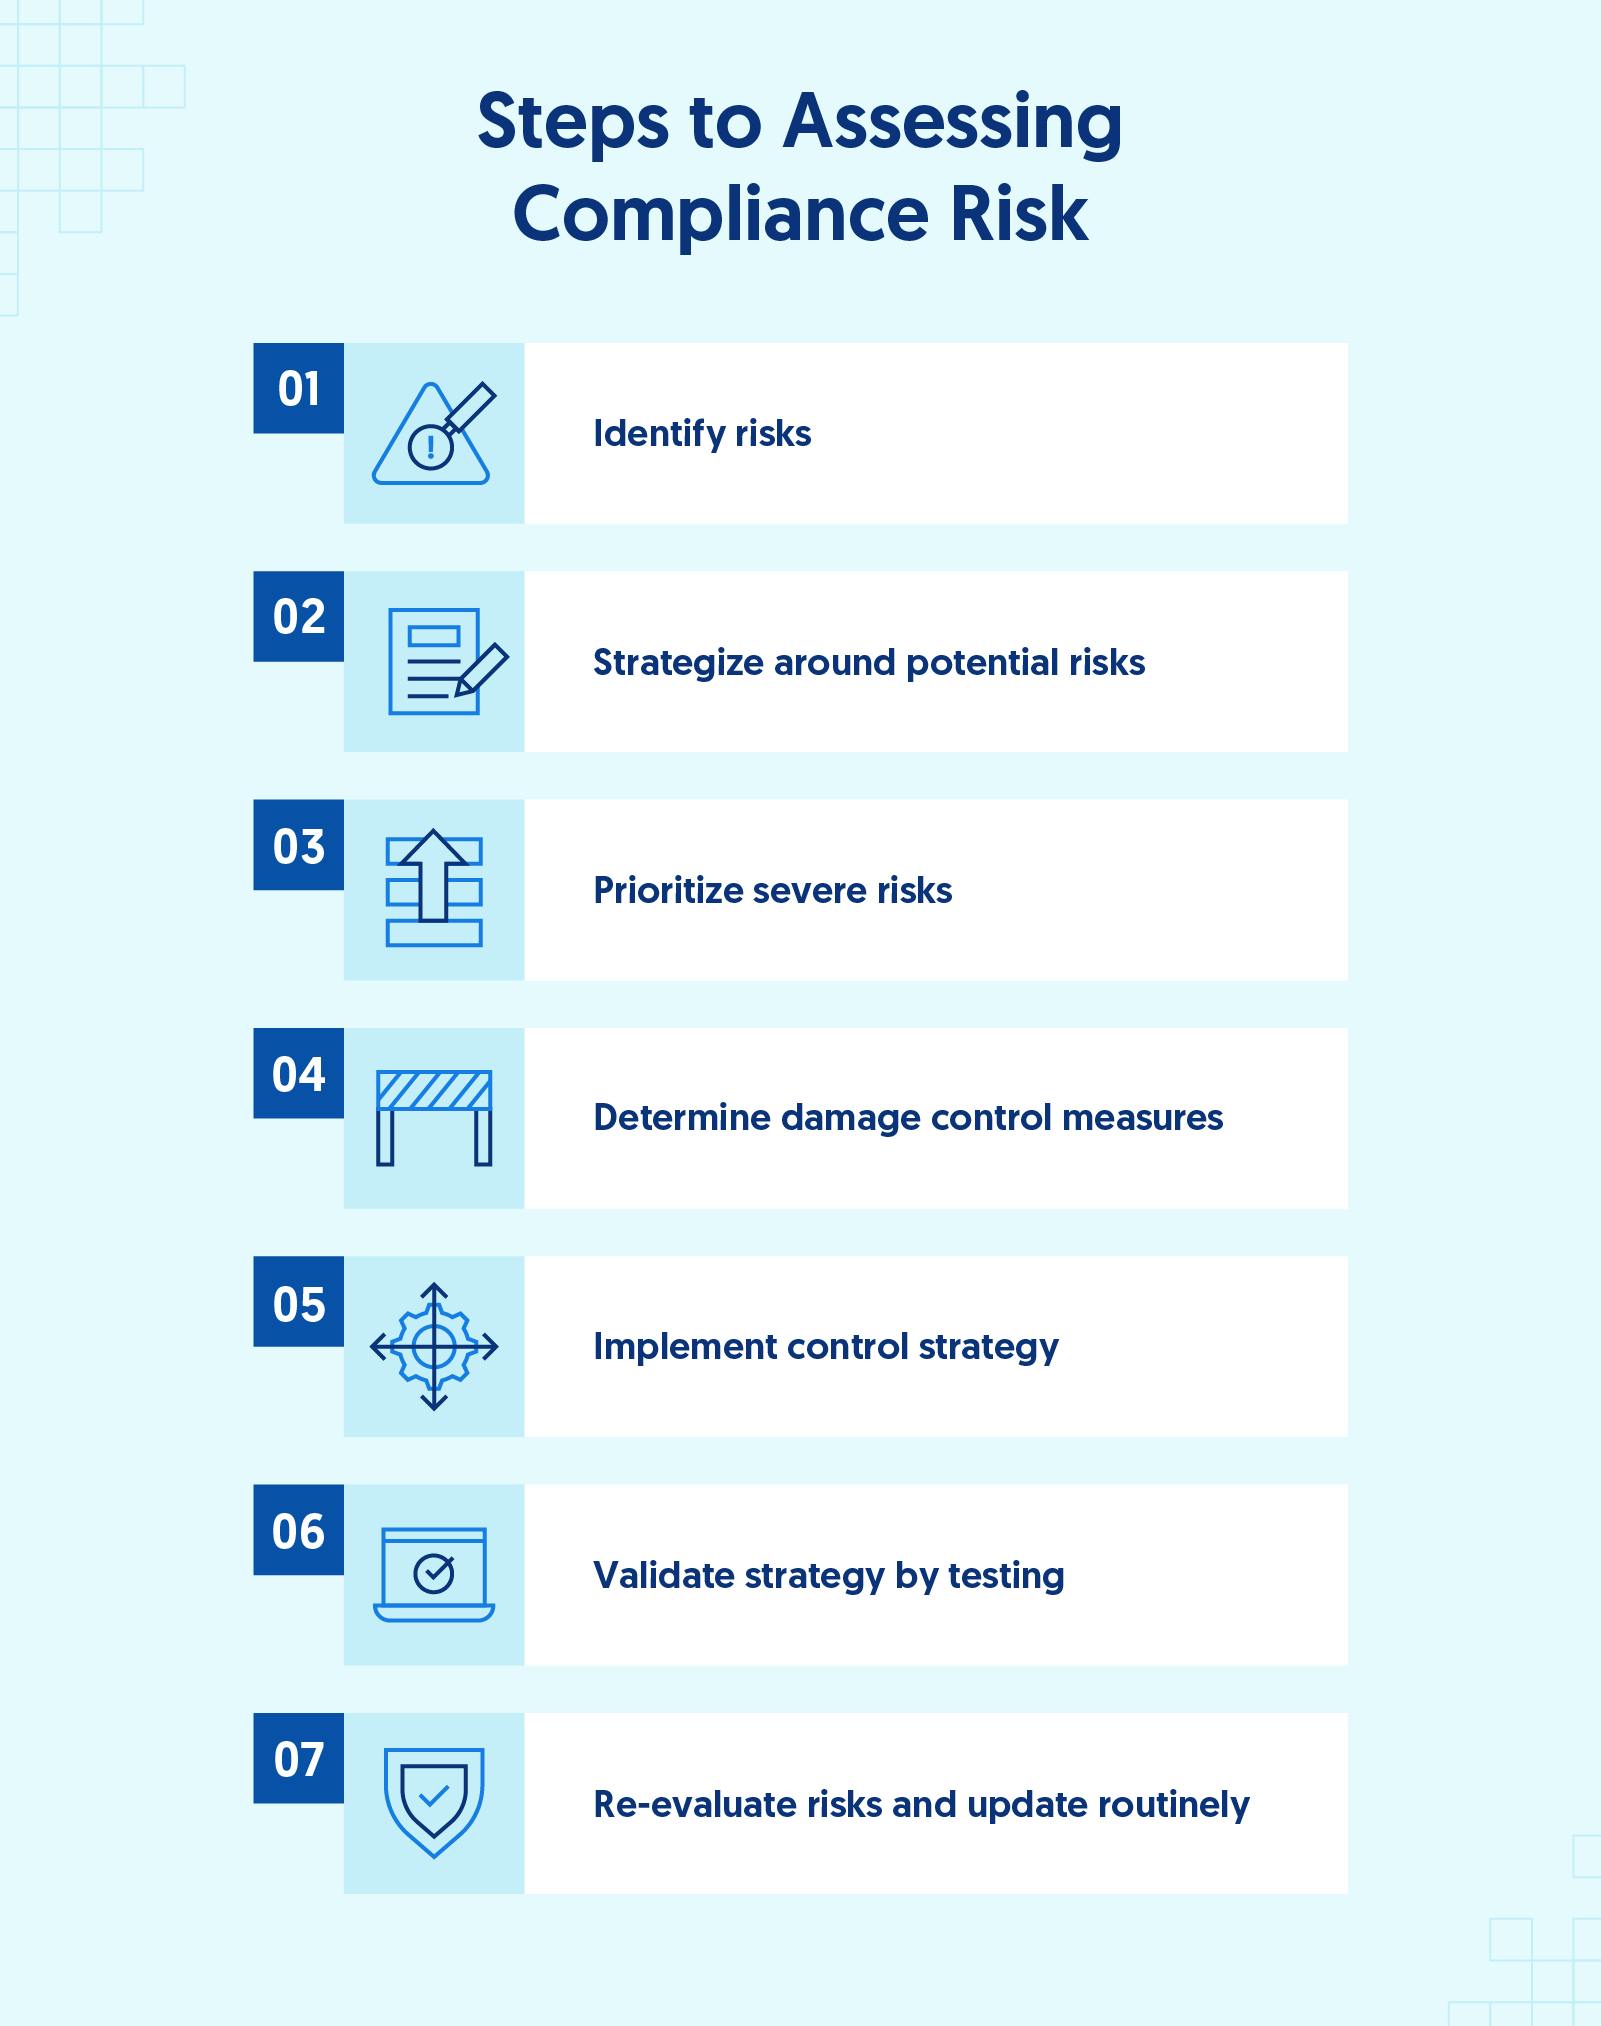 Illustration showing the seven steps to assessing compliance risk